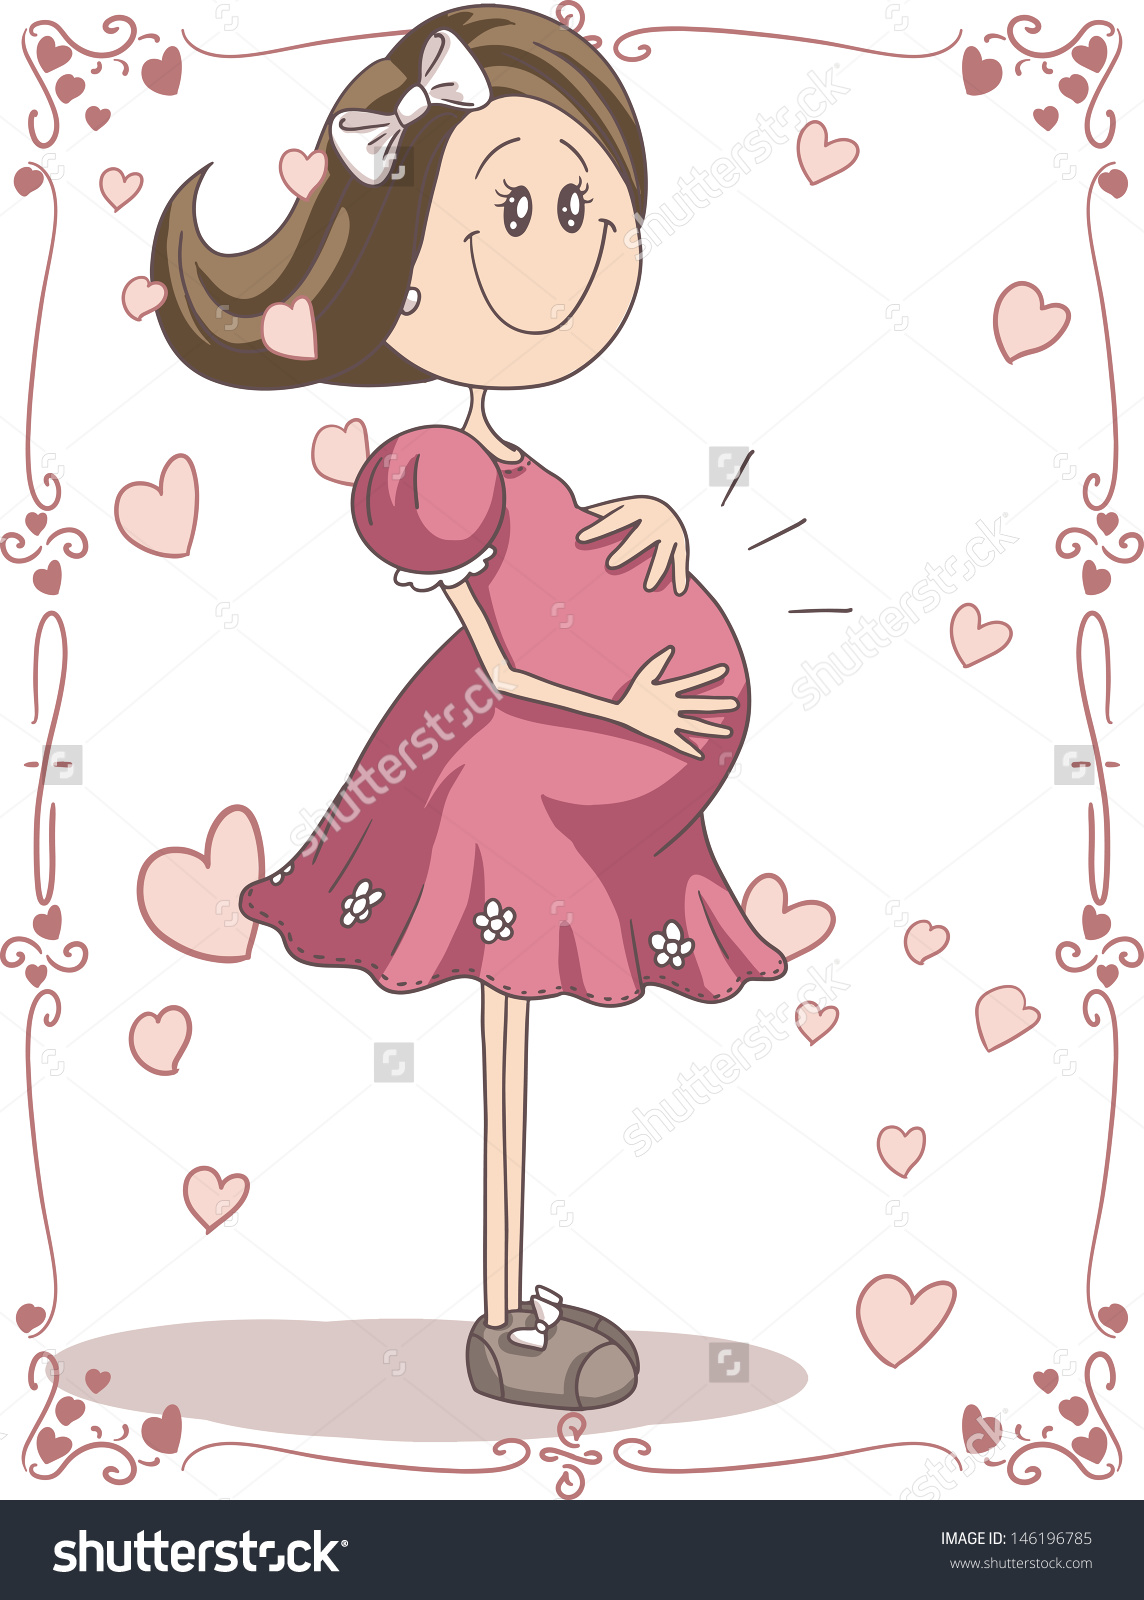 Showing post & media for Cute pregnant girl cartoon.